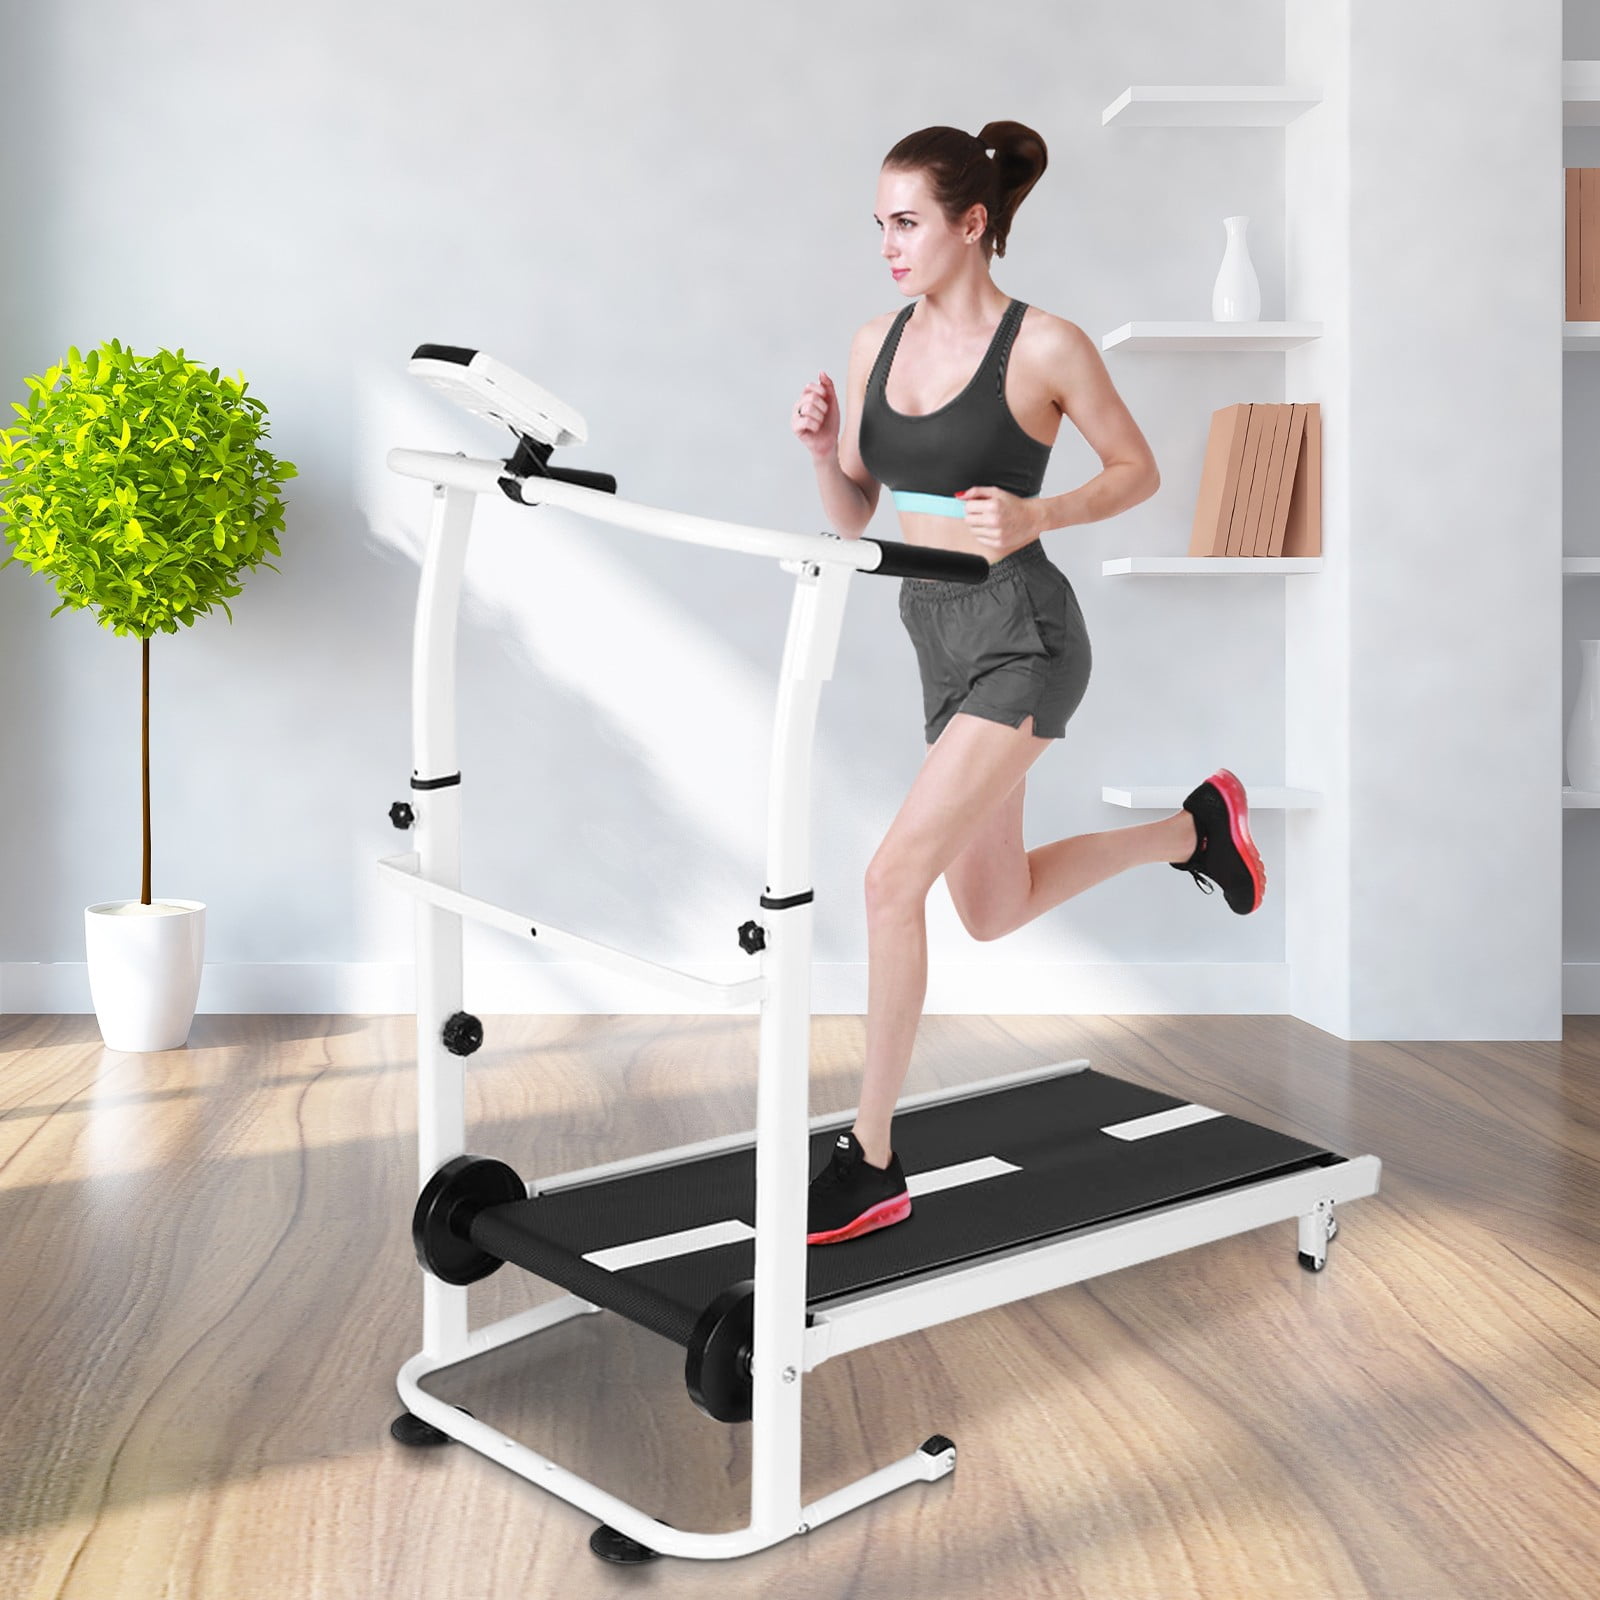 Folding Manual Treadmill Workout Jogging Machine Cardio Fitness Exercise Incline 